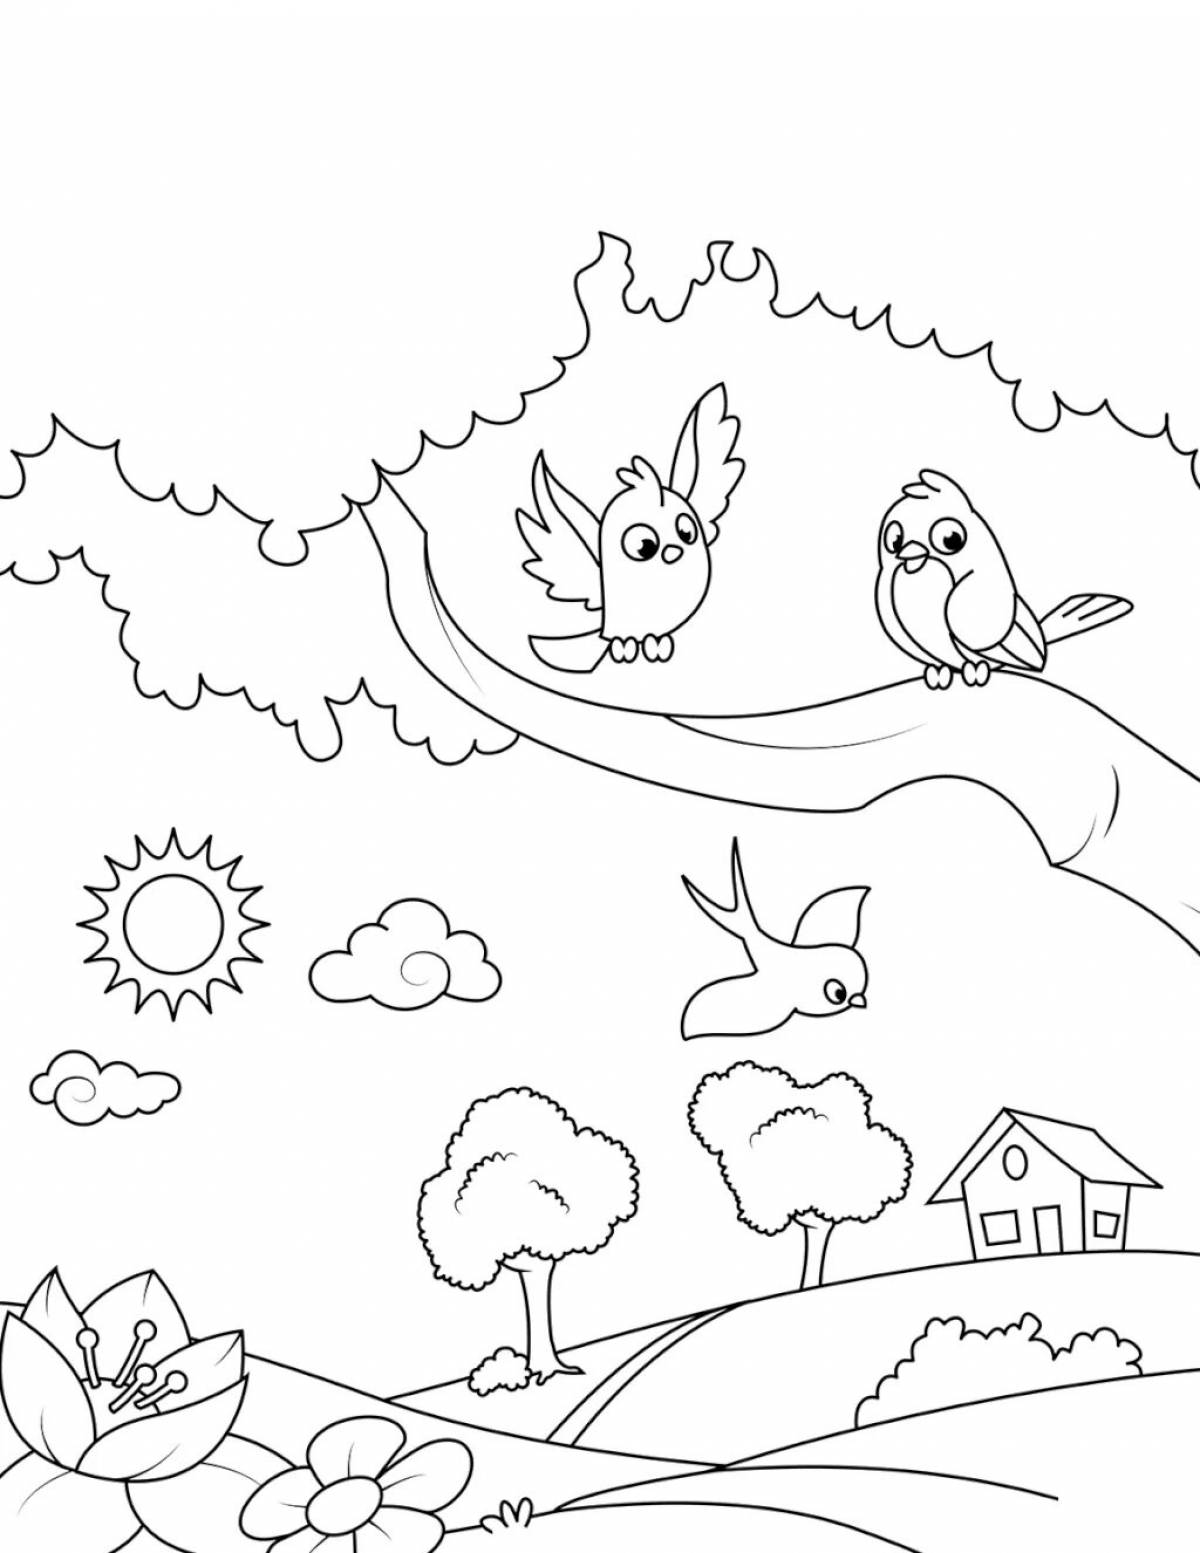 Colorful spring has come coloring page